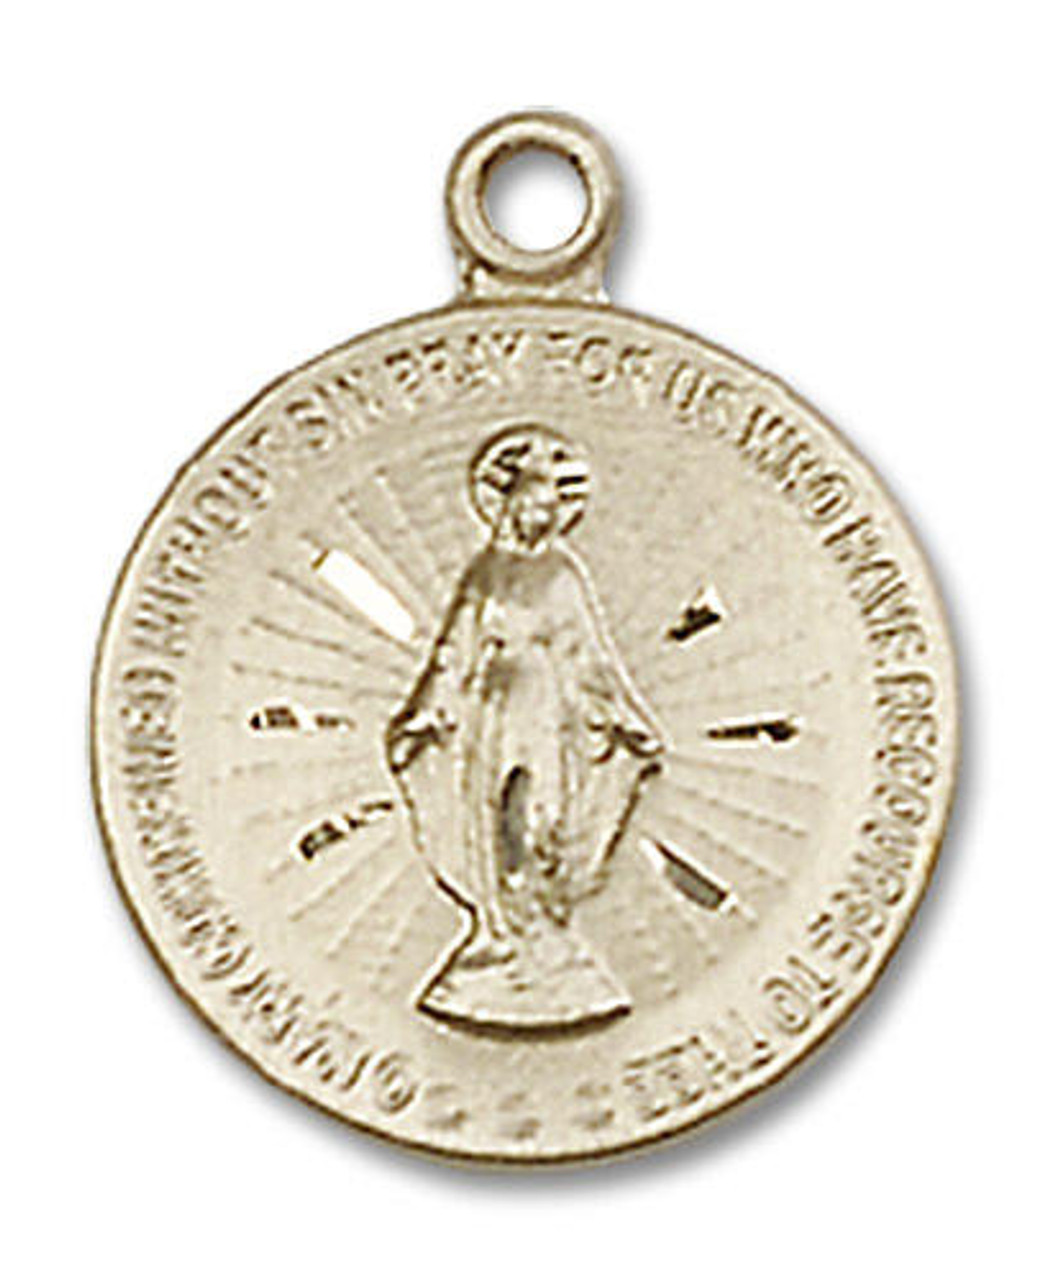 Extra Large Miraculous Medal - 14kt Gold 1 3/8 x 1 1/4 Round